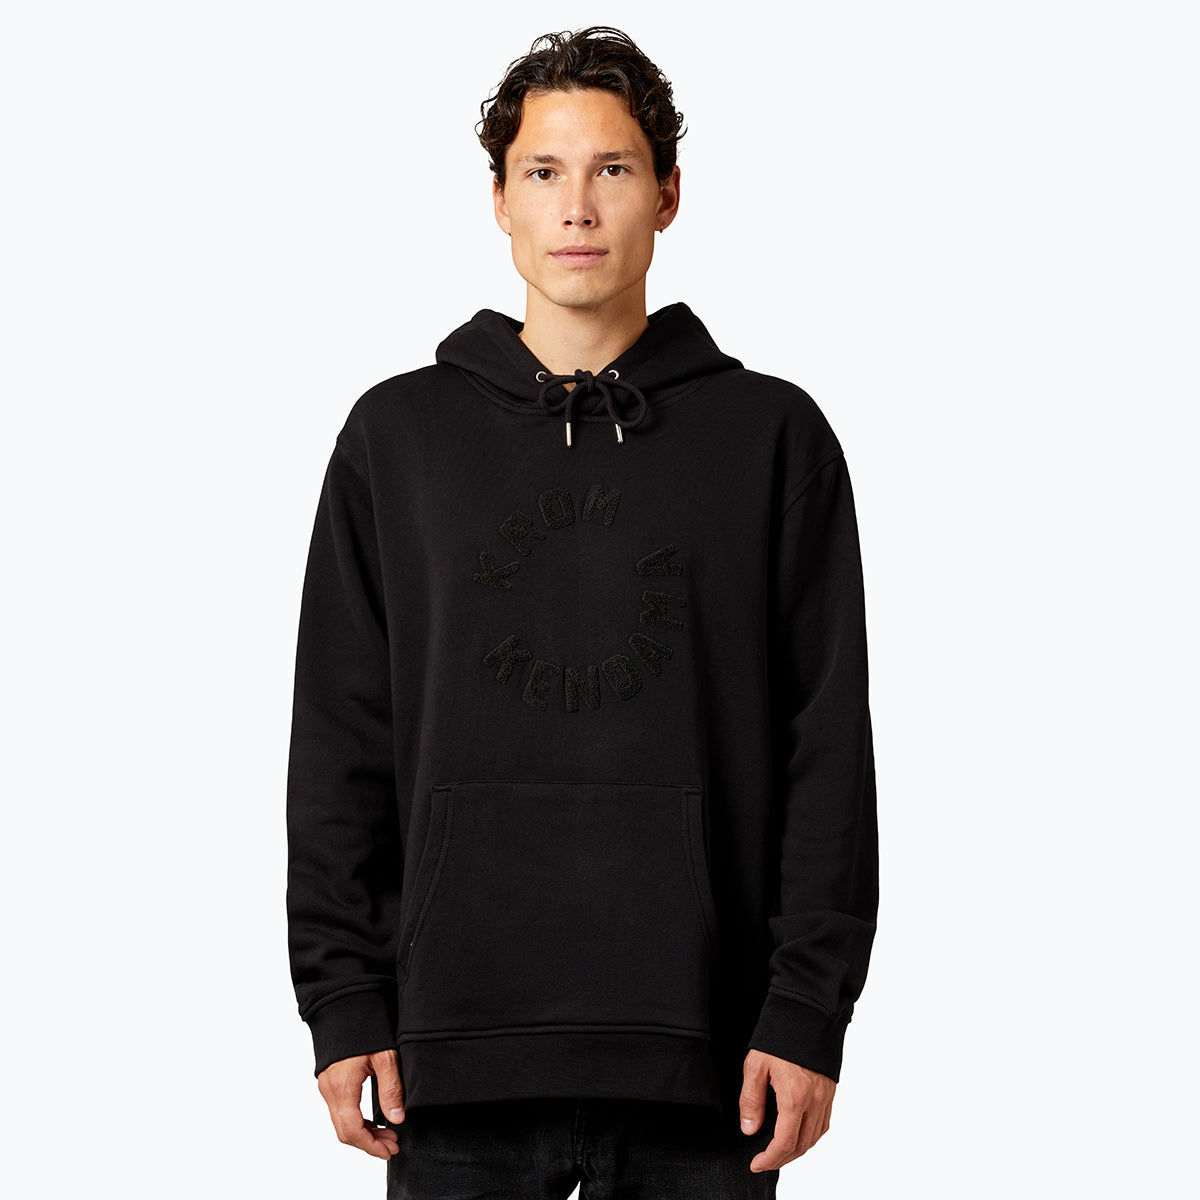 KROM PLAY LIFE COLLECTION HOODIE MODEL